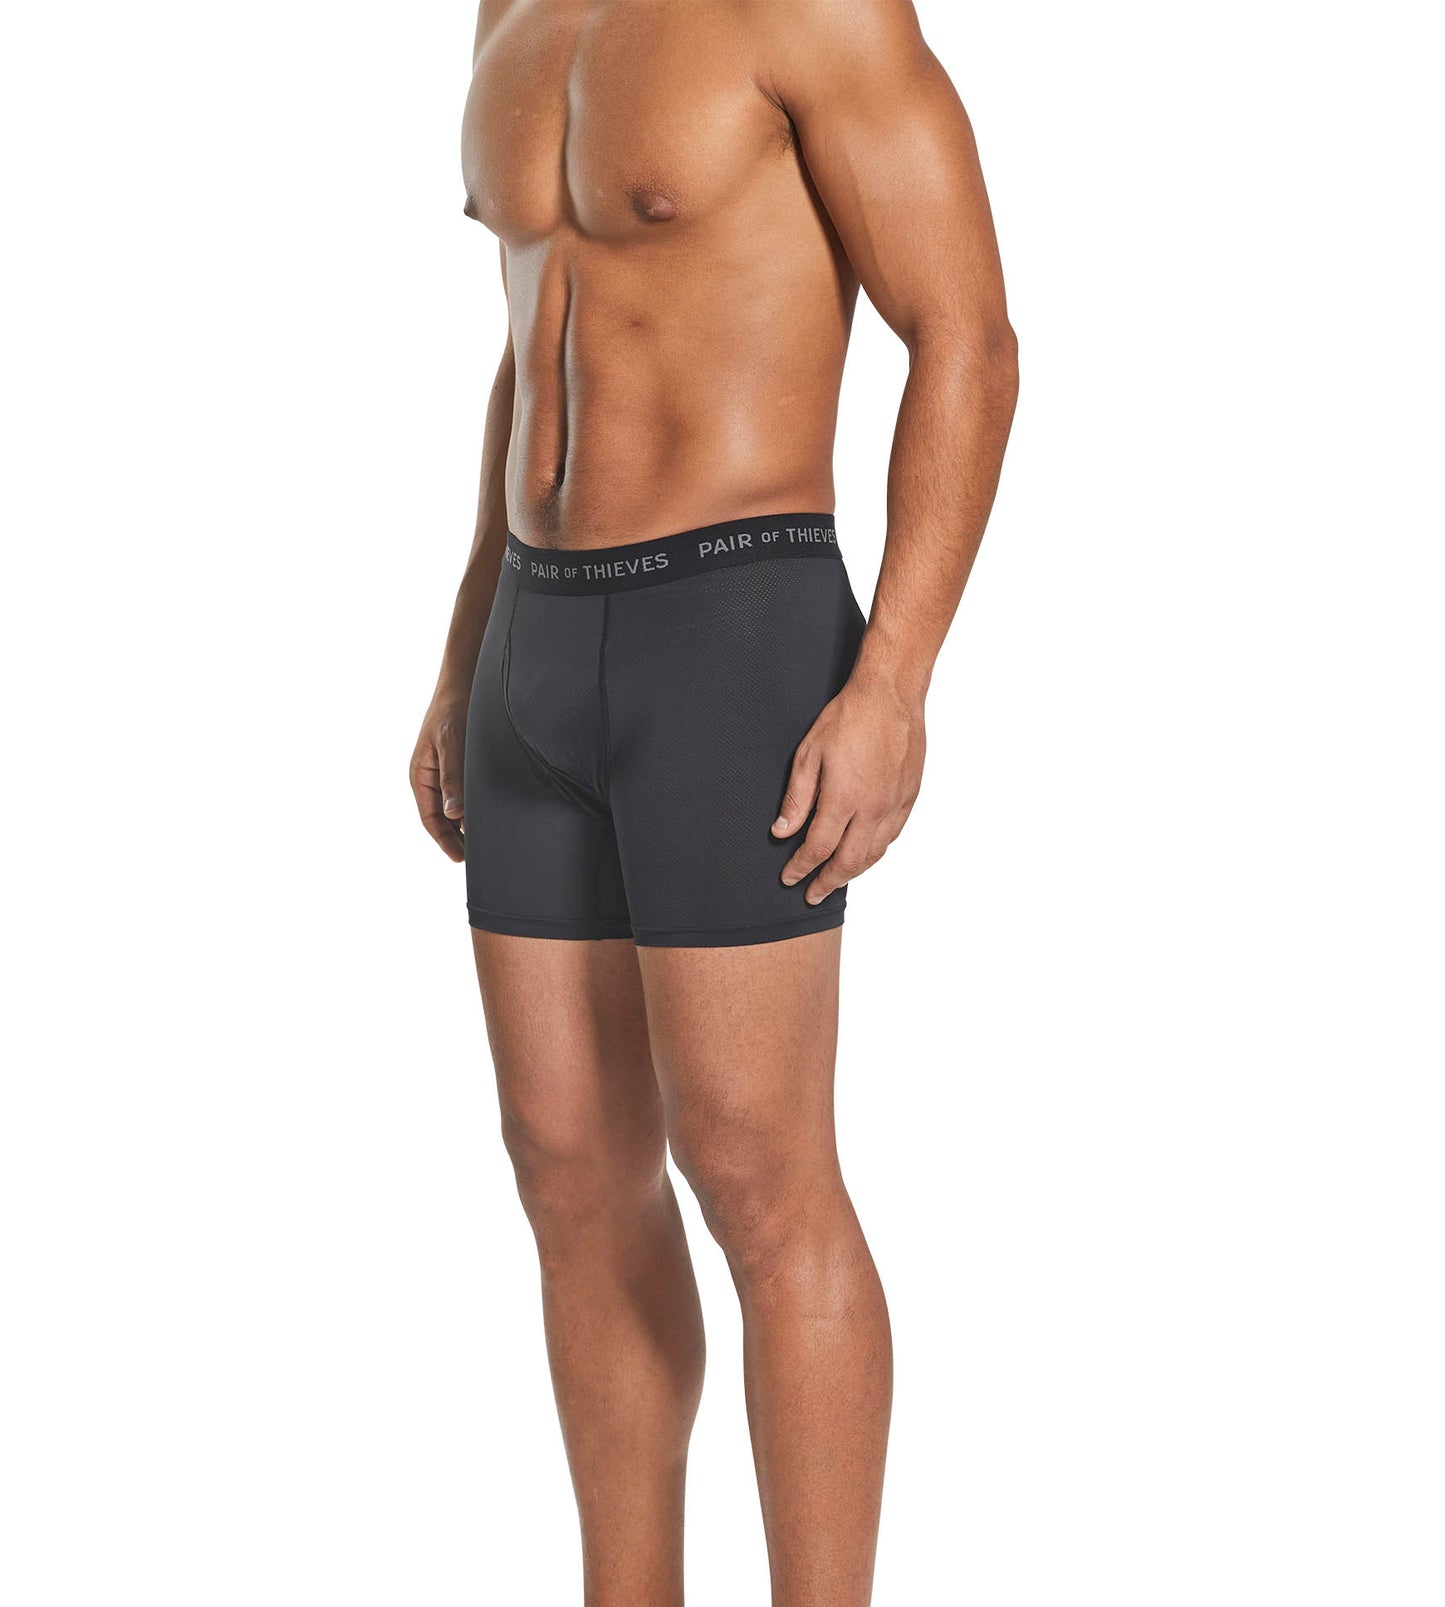 Police Auctions Canada - Men's Pair of Thieves SuperFit Boxer Briefs, 2  Pack - Size L (516676L)